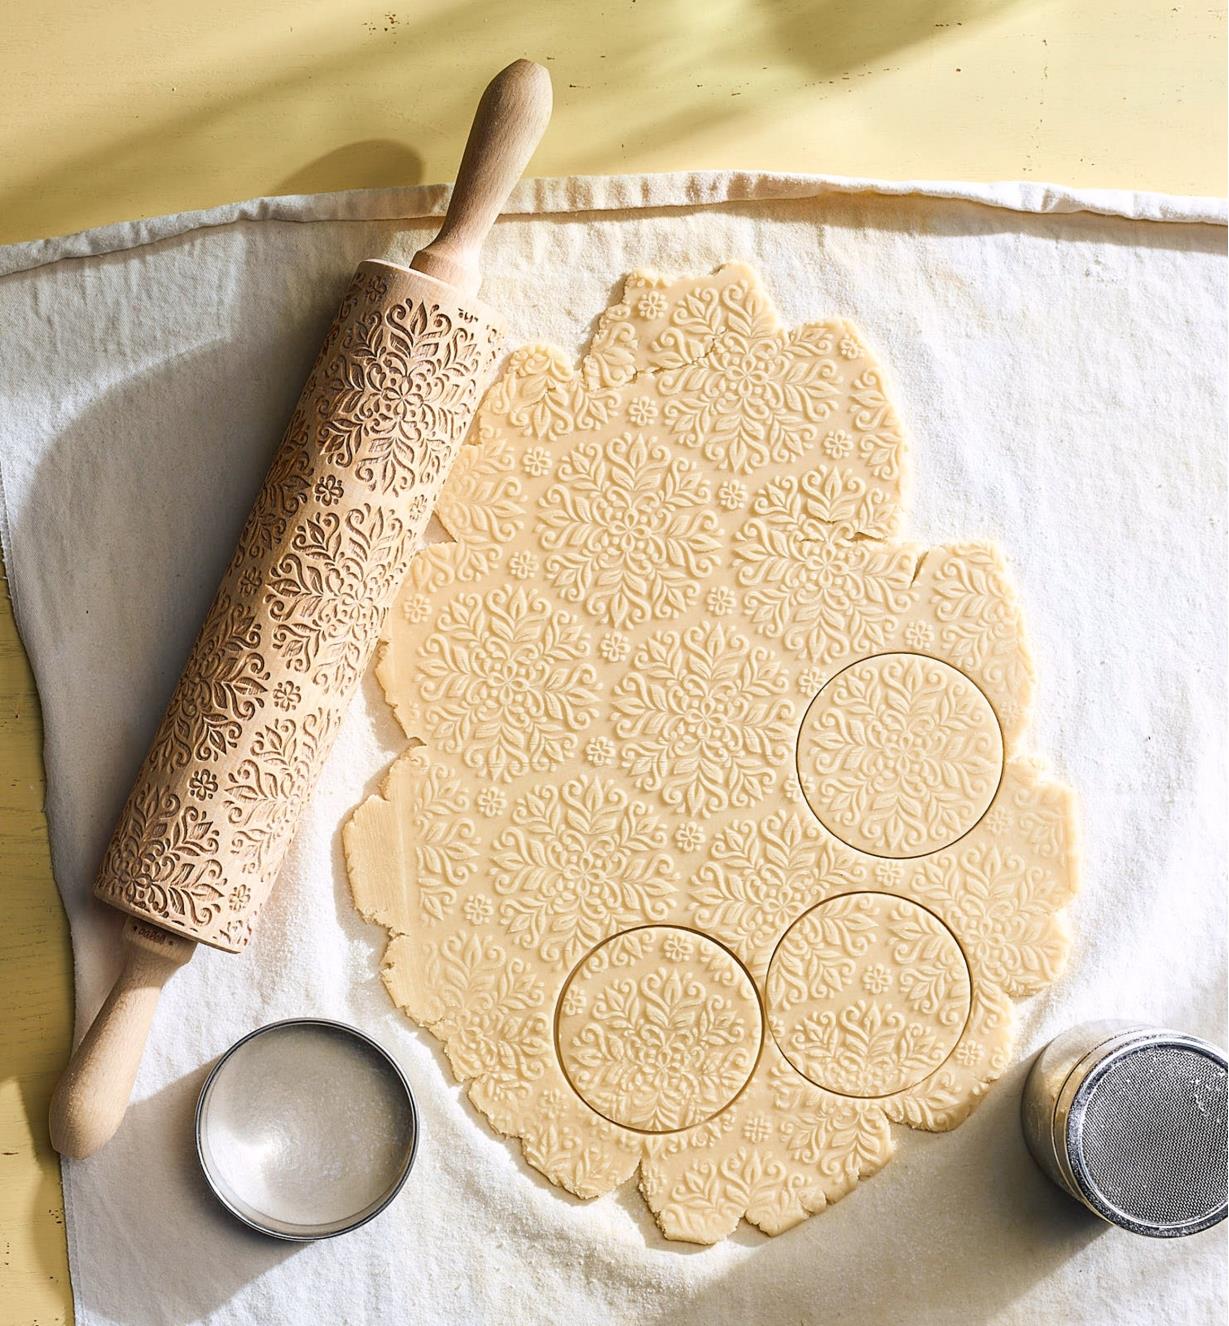 An embossing rolling pin on a pastry cloth beside embossed raw dough cut with circular cookie cutters